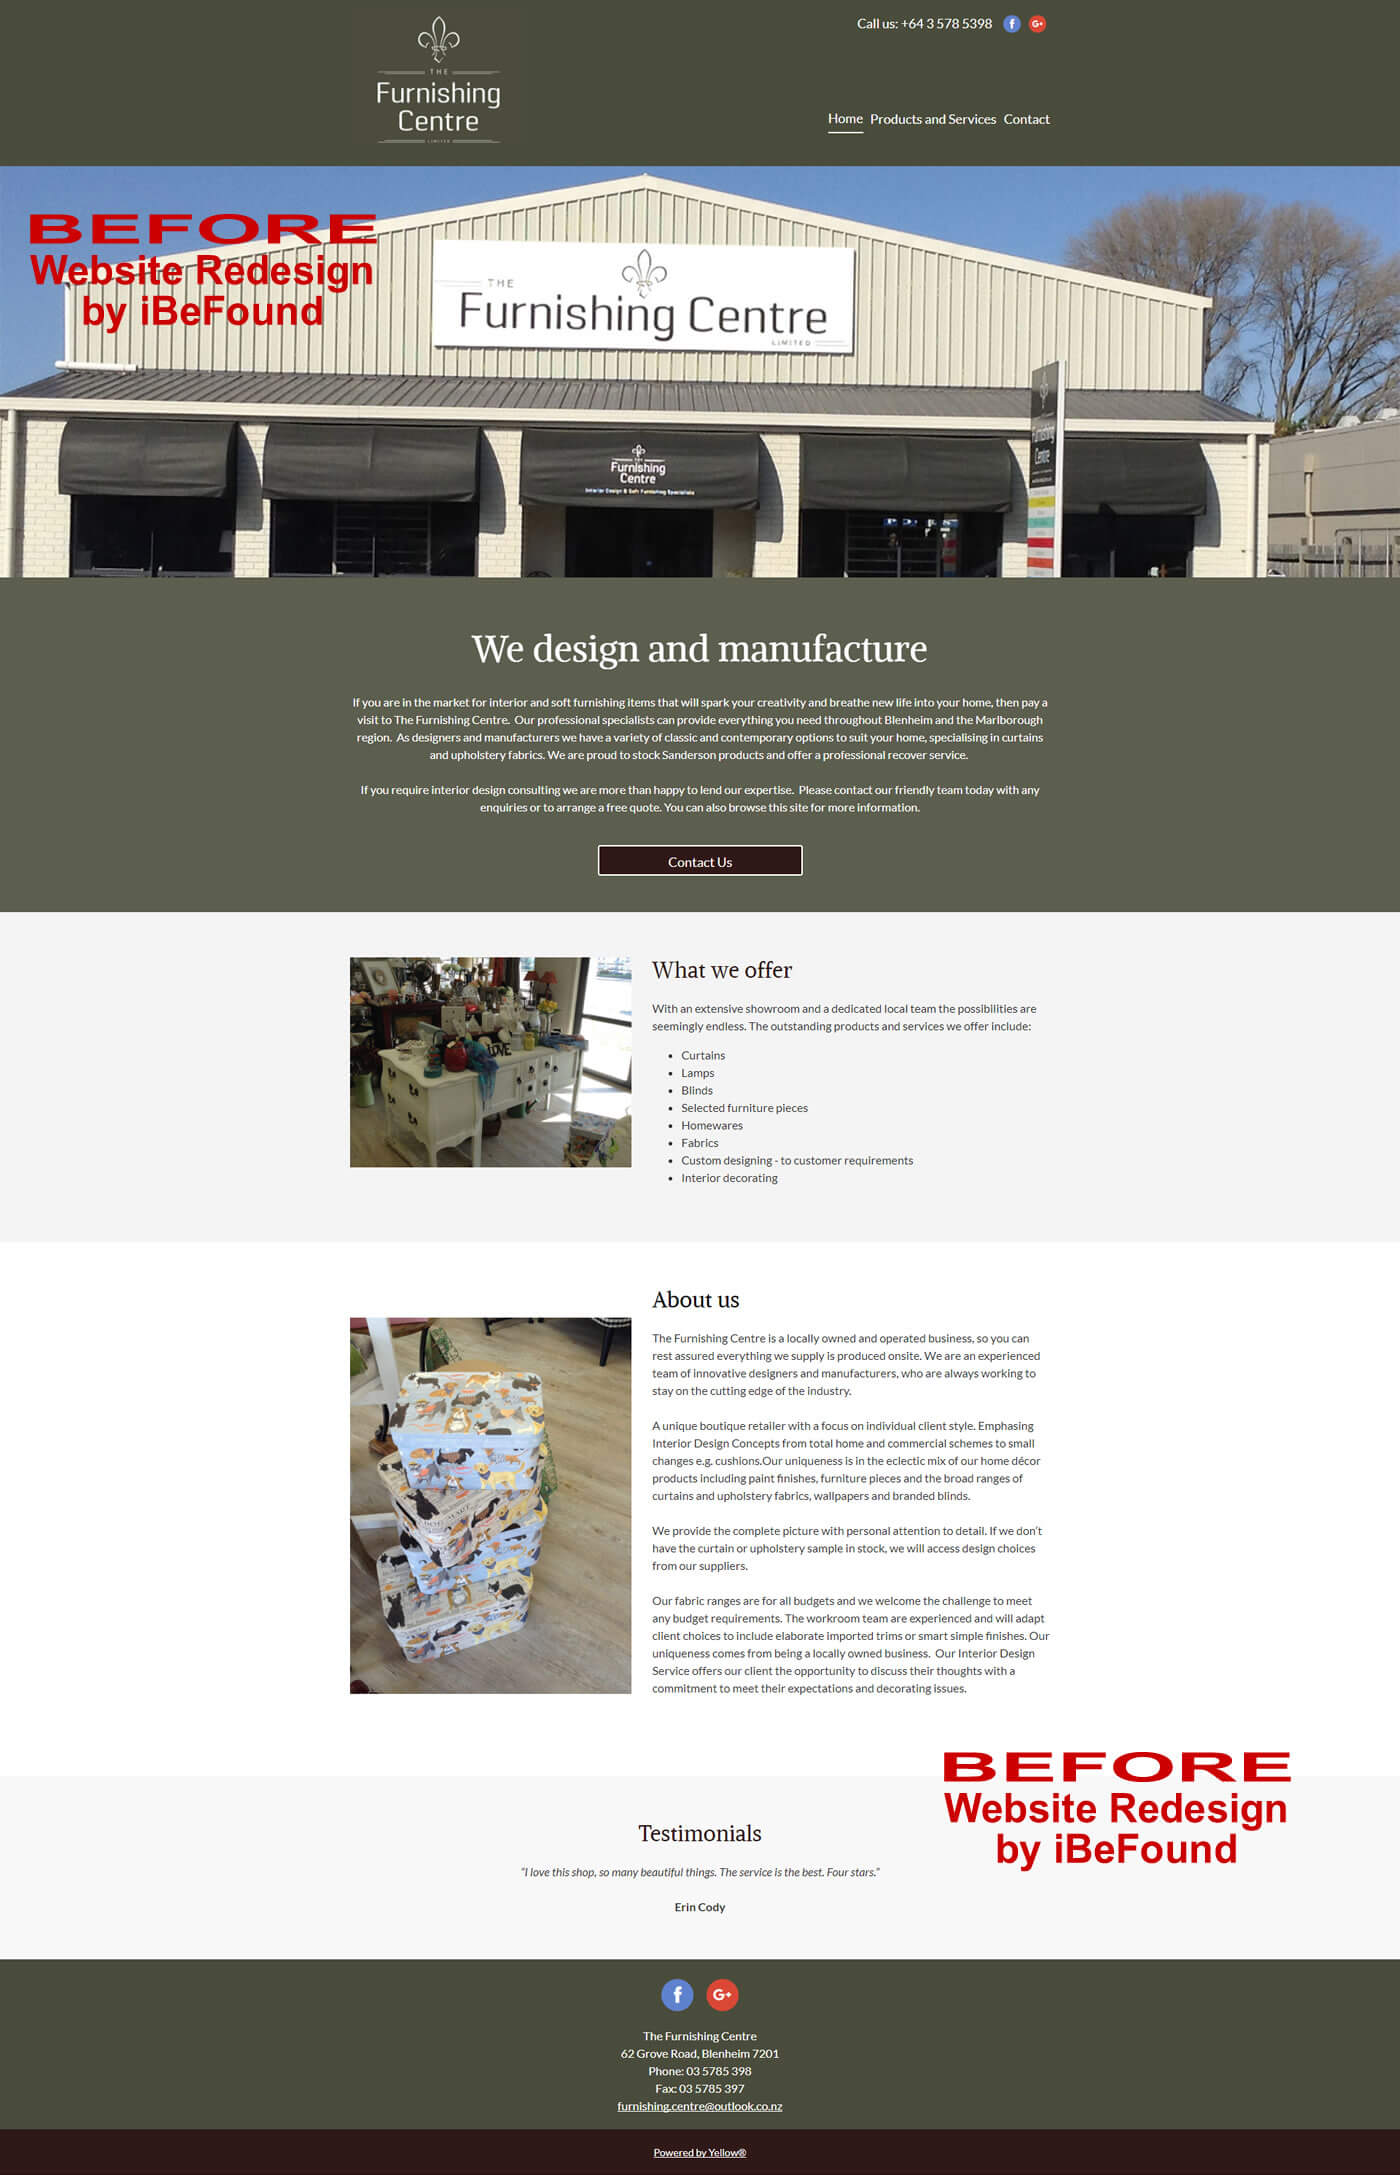 Homepage Of The Furnishing Centre Before Website Redesign By IBeFound Digital Marketing Division